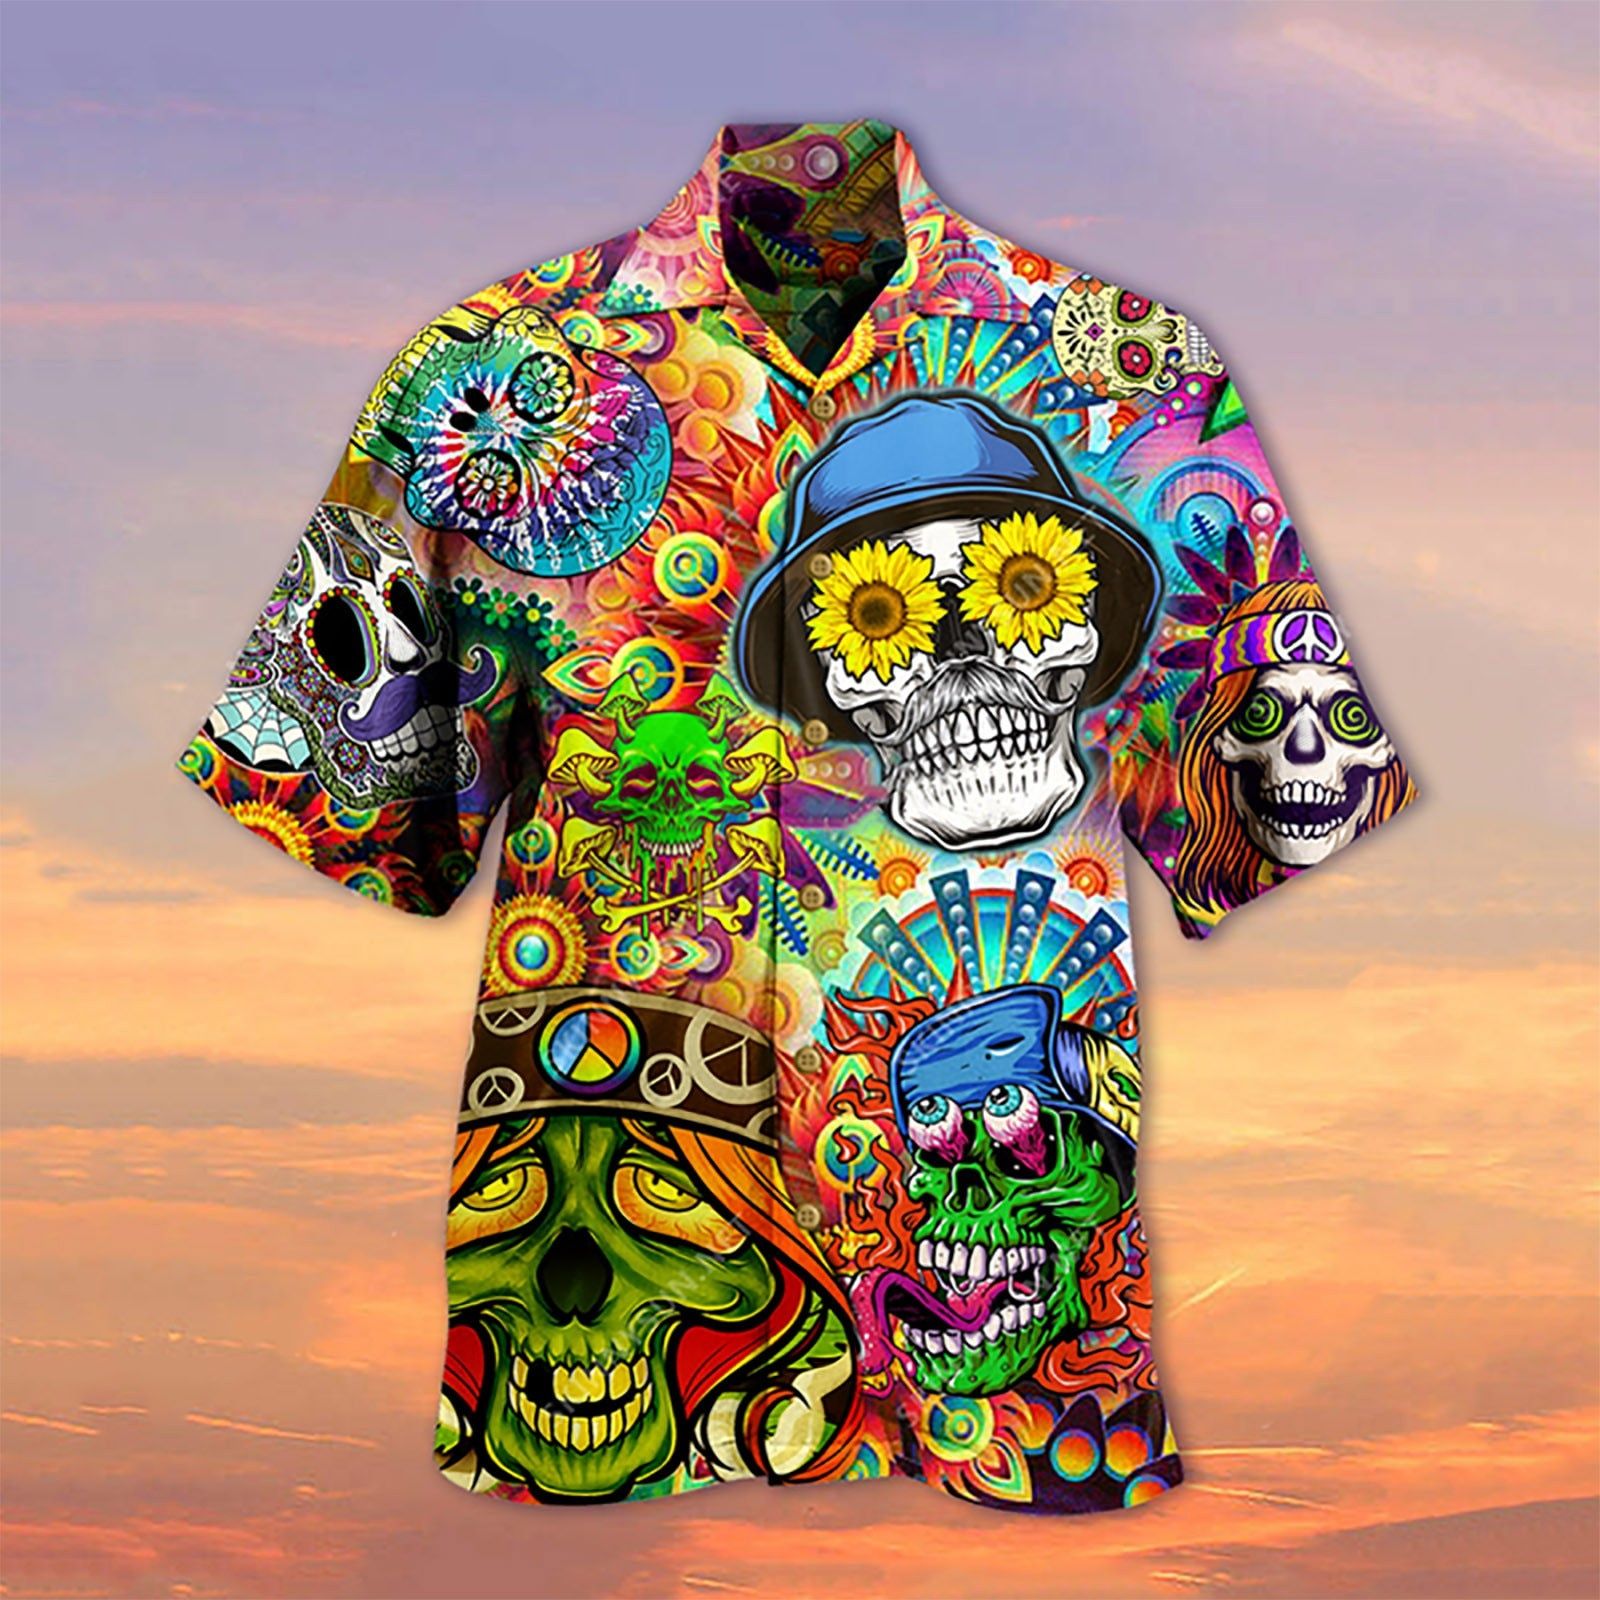 Skull Loose   Colorful High Quality Unisex Hawaiian Shirt For Men And Women Dhc17064109